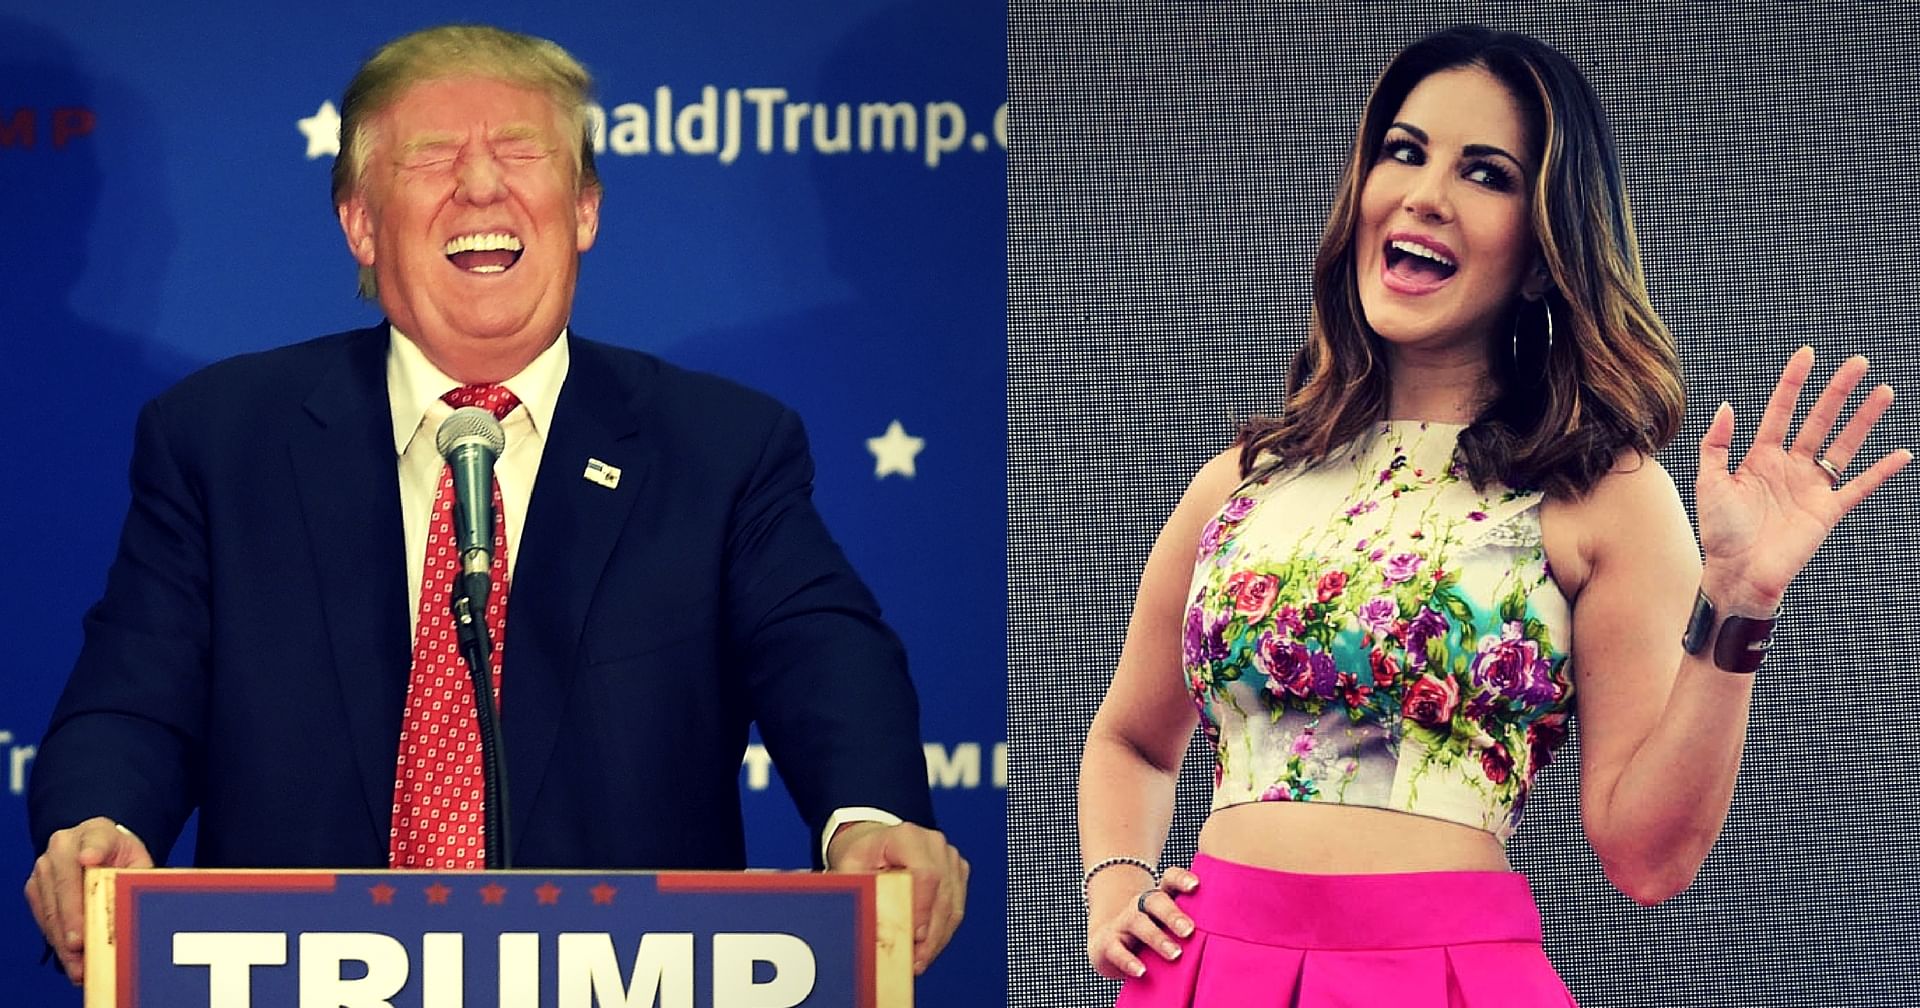 You'll Never Guess What Sunny Leone & Donald Trump Have in Common!